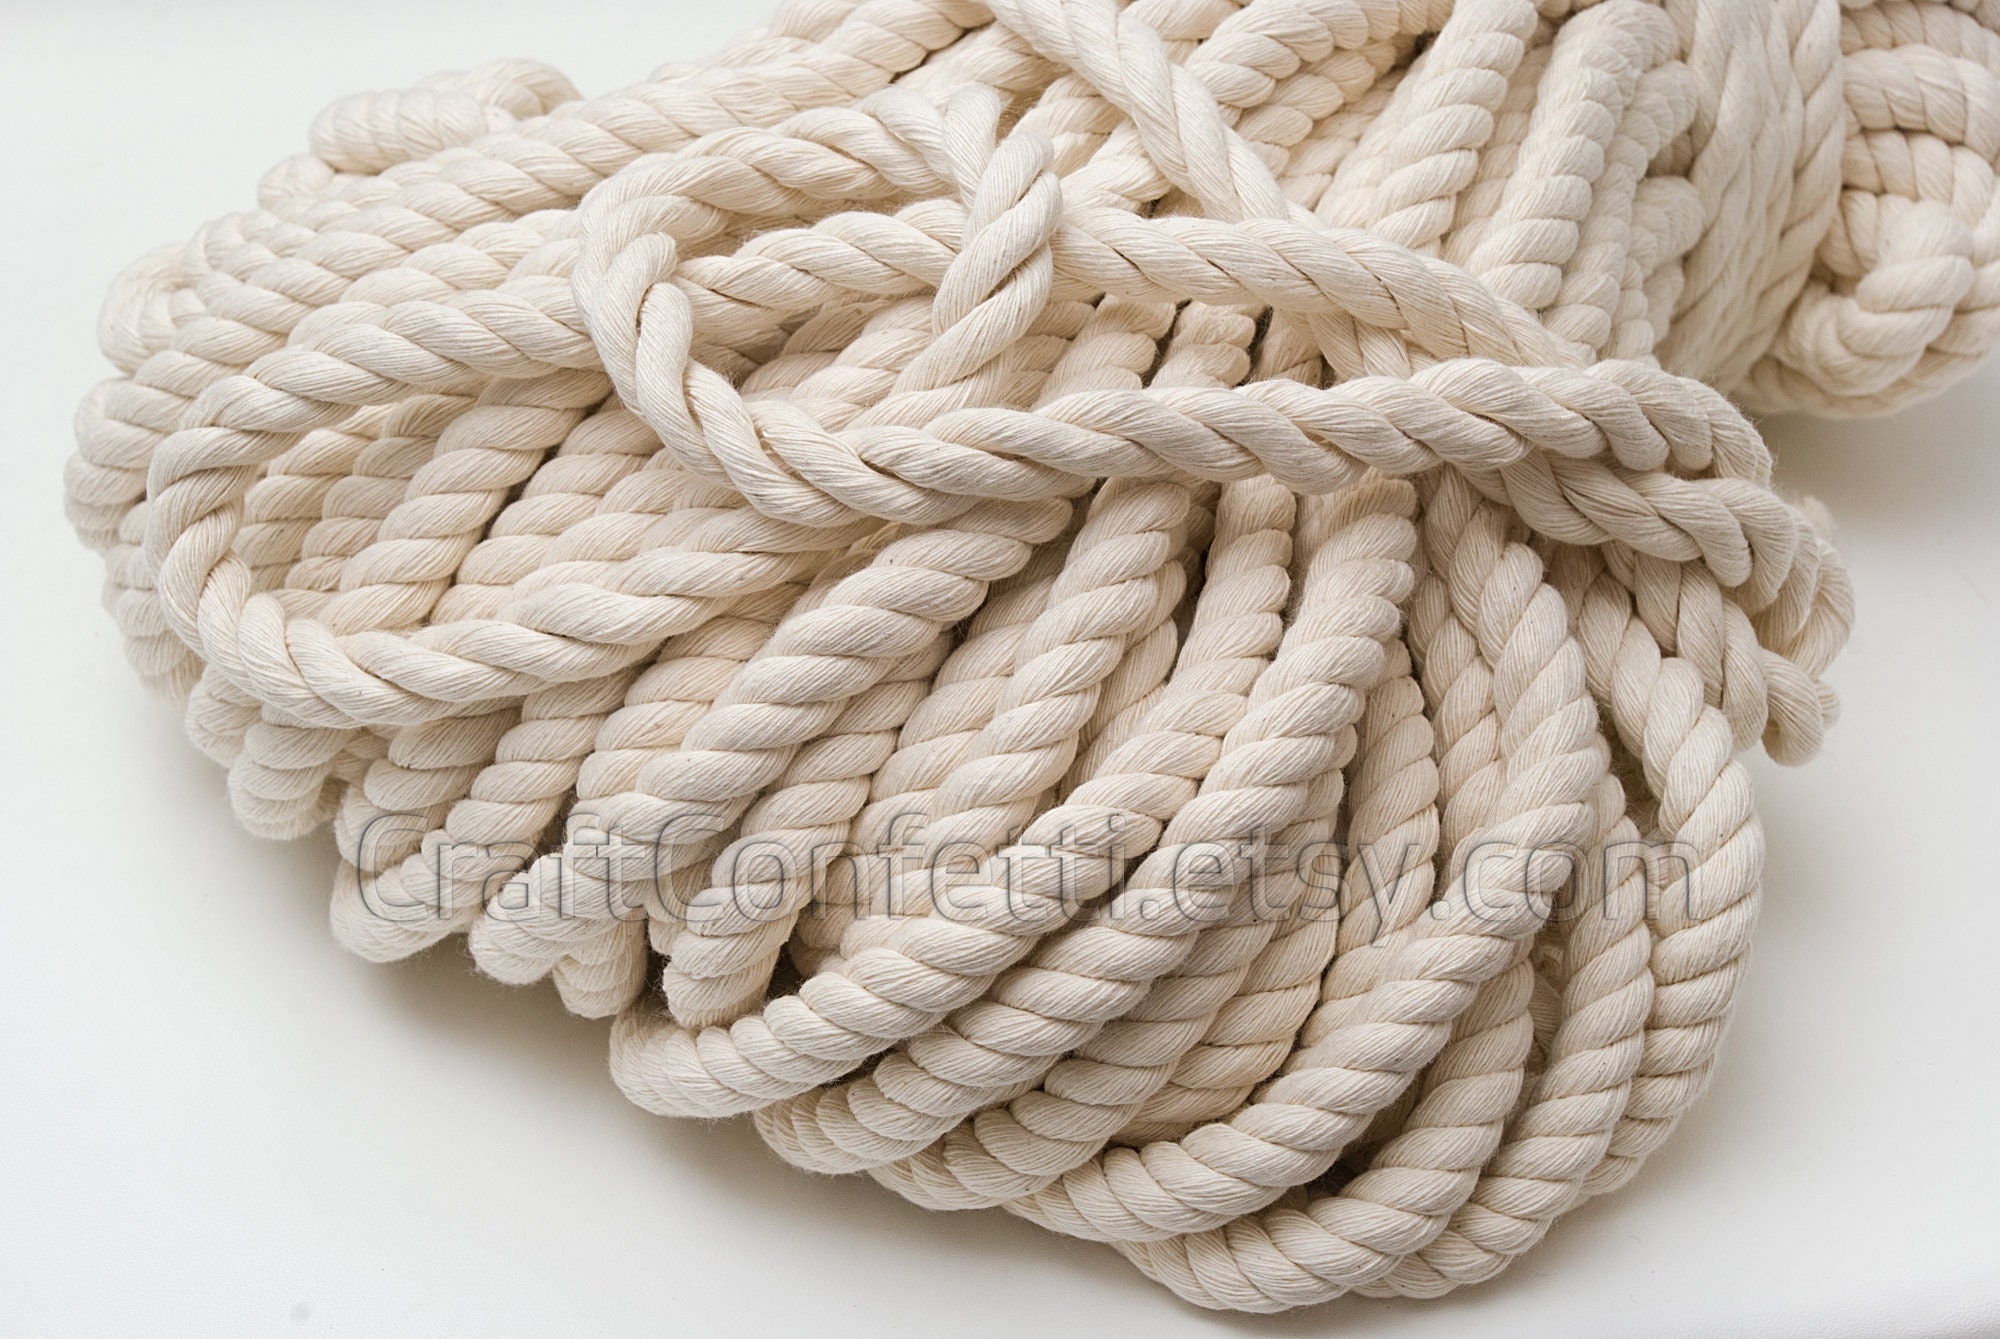 12mm Twisted Jute сord 30ft, Decorative Thick Rope, Wall Hanging Crafting,  Macrame Jute Cord, Nautical Decor, Beach Rope / 30ft 10yd 9m 